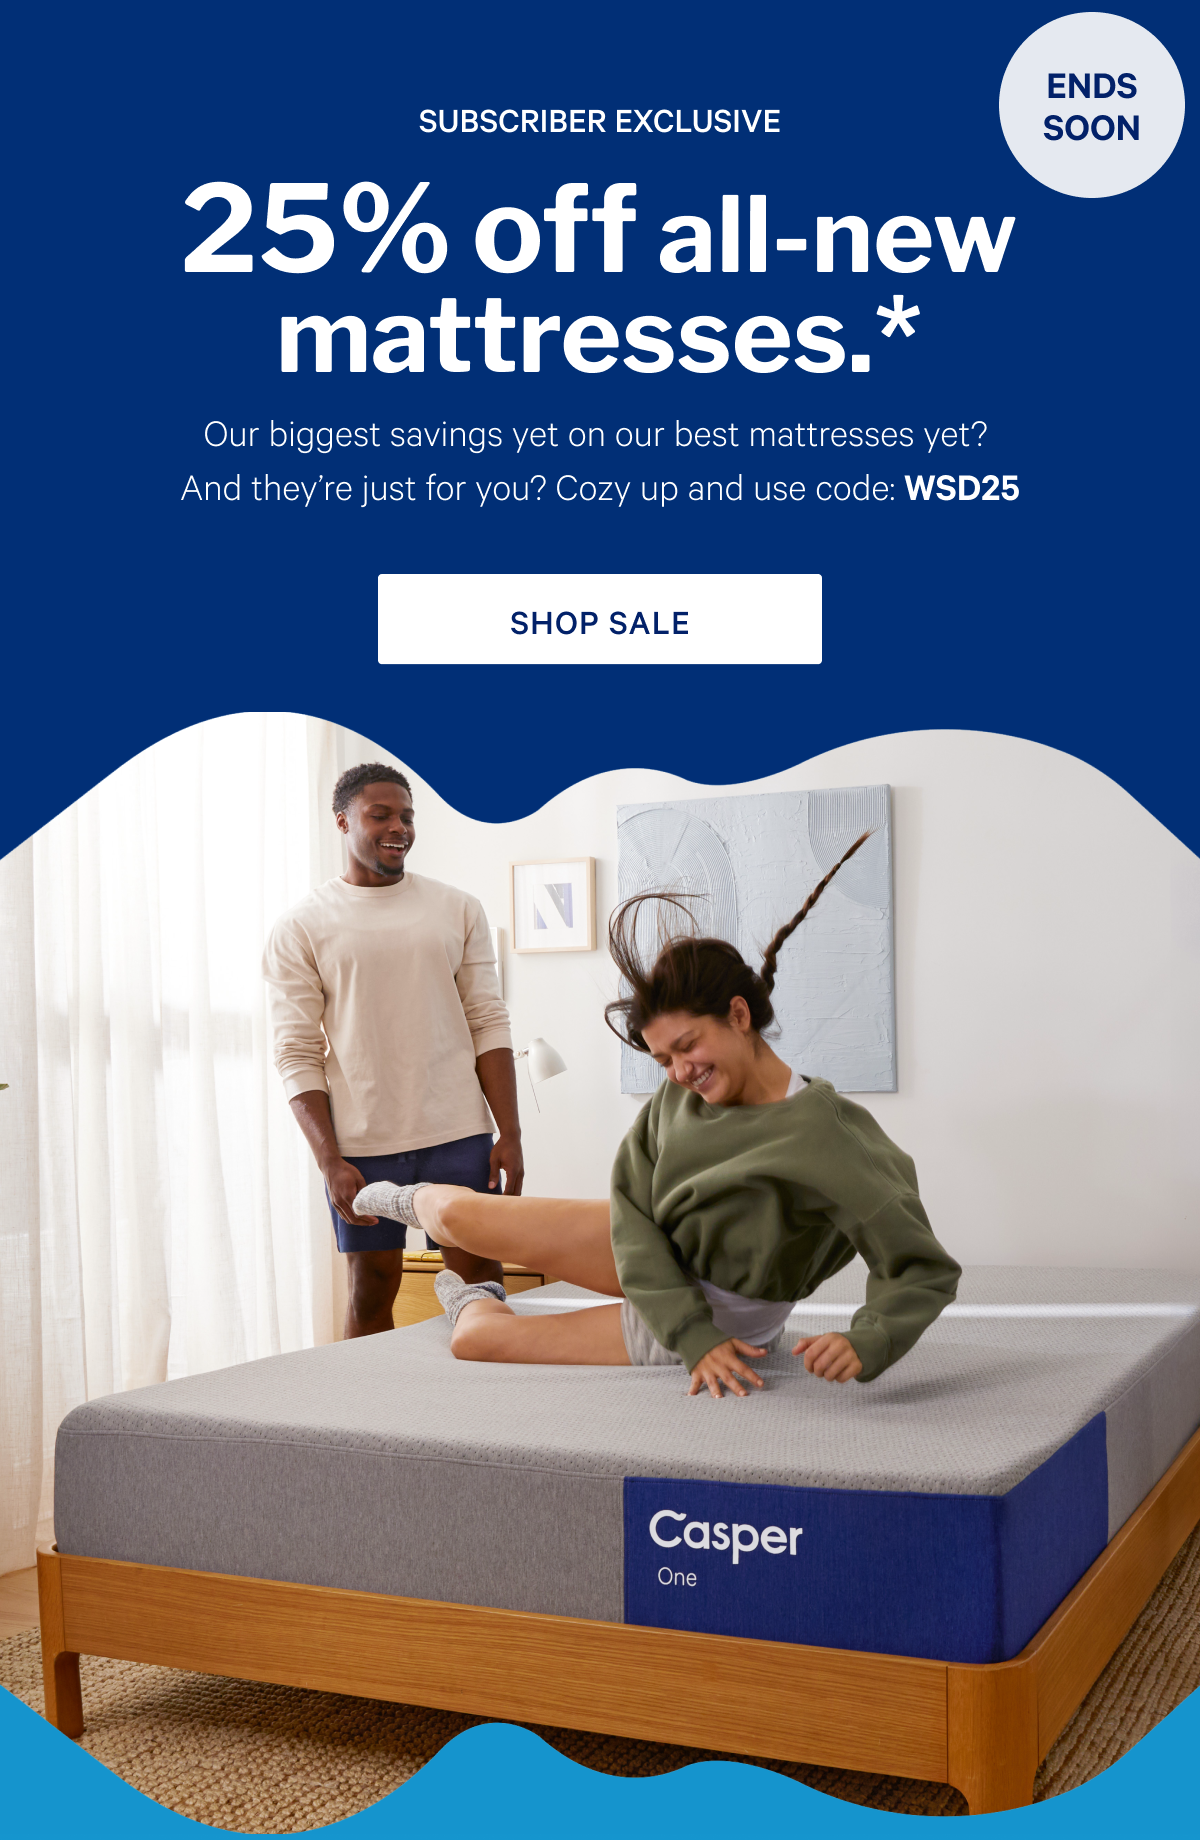 25% off all-new mattresses.* >> Our biggest savings yet on our best mattresses yet? And they’re just for you? Cozy up and use code: WSD25 >> Shop sale >>